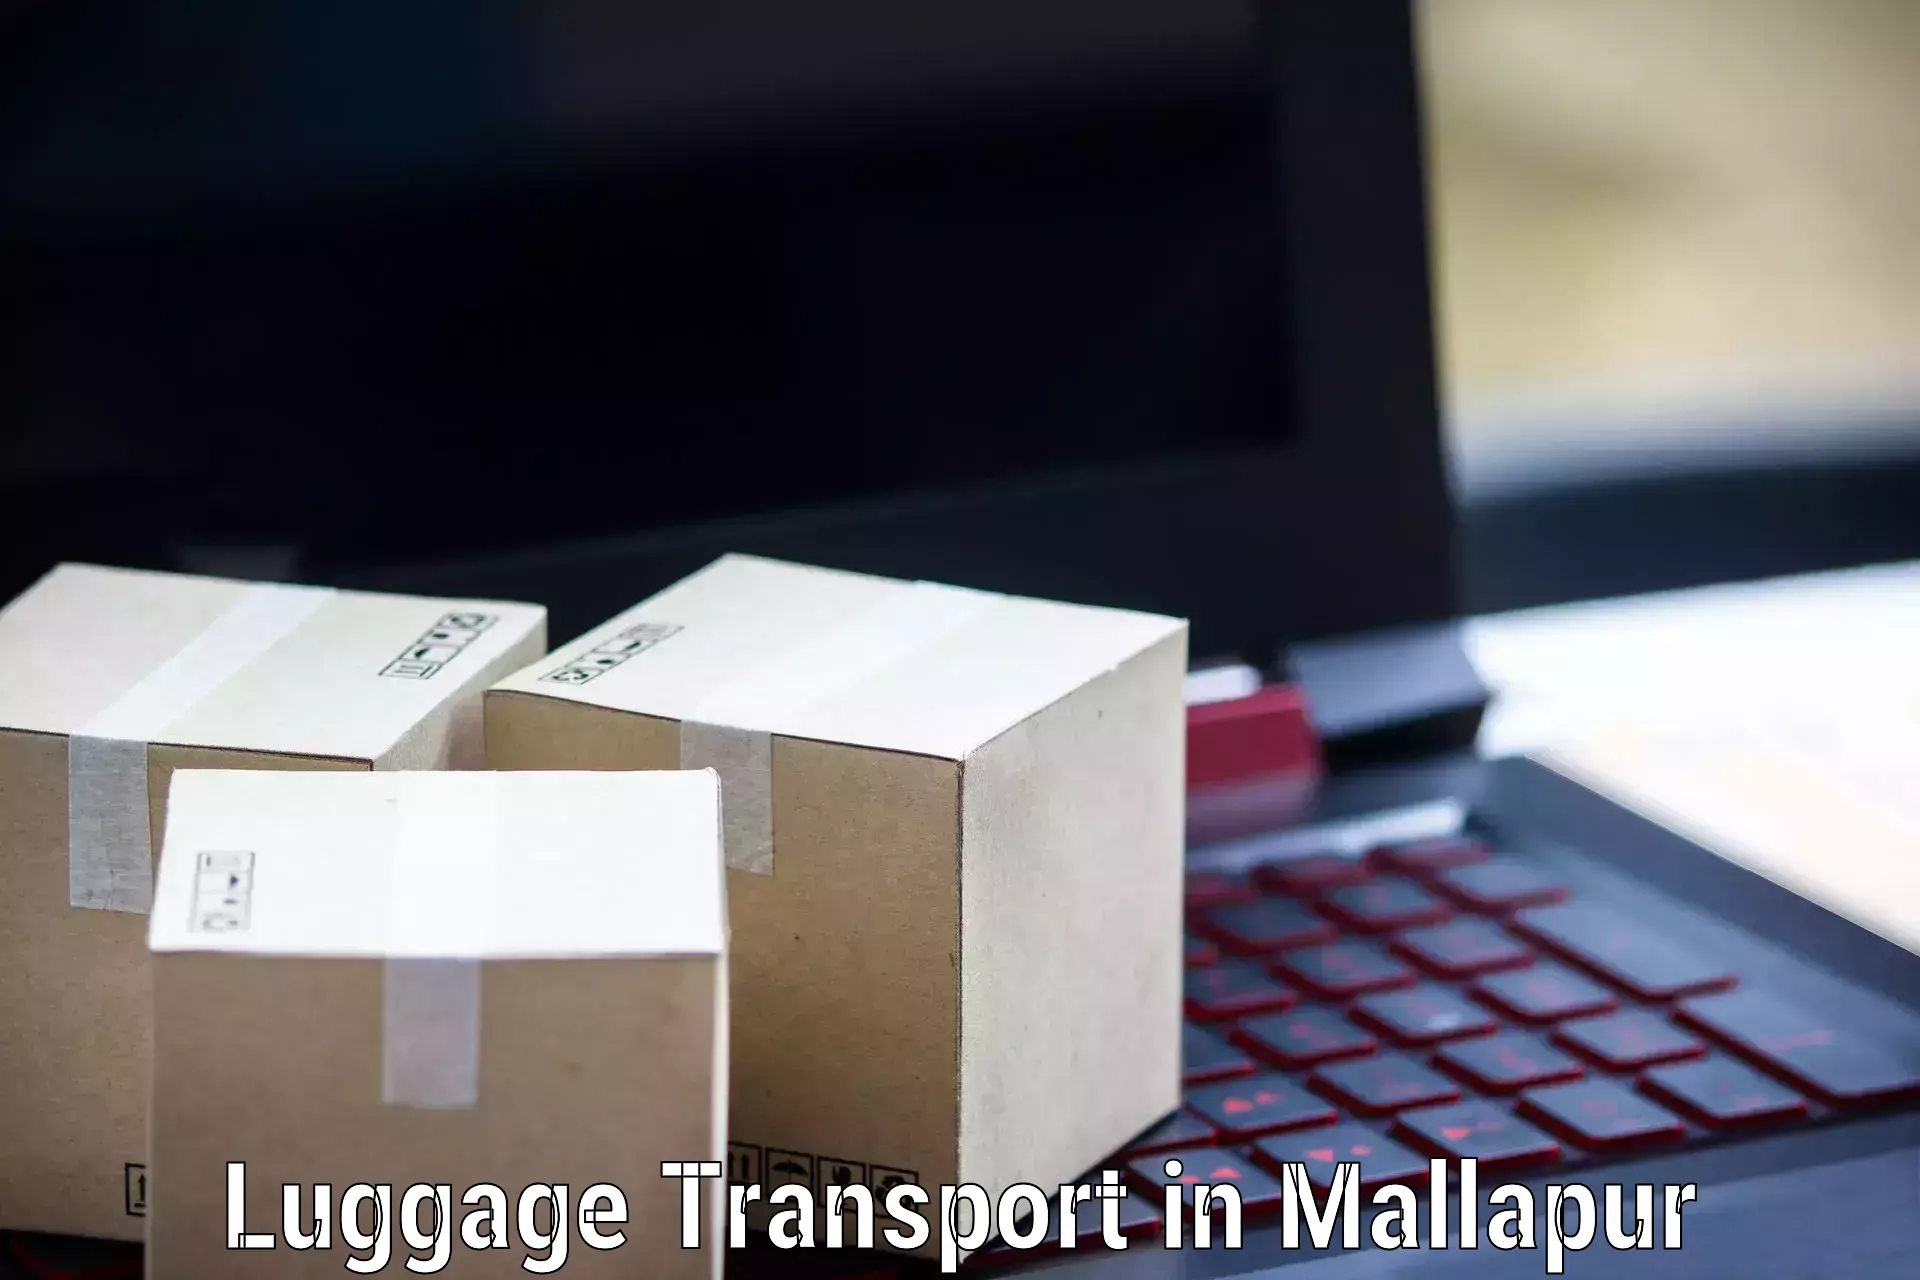 Outsize baggage transport in Mallapur